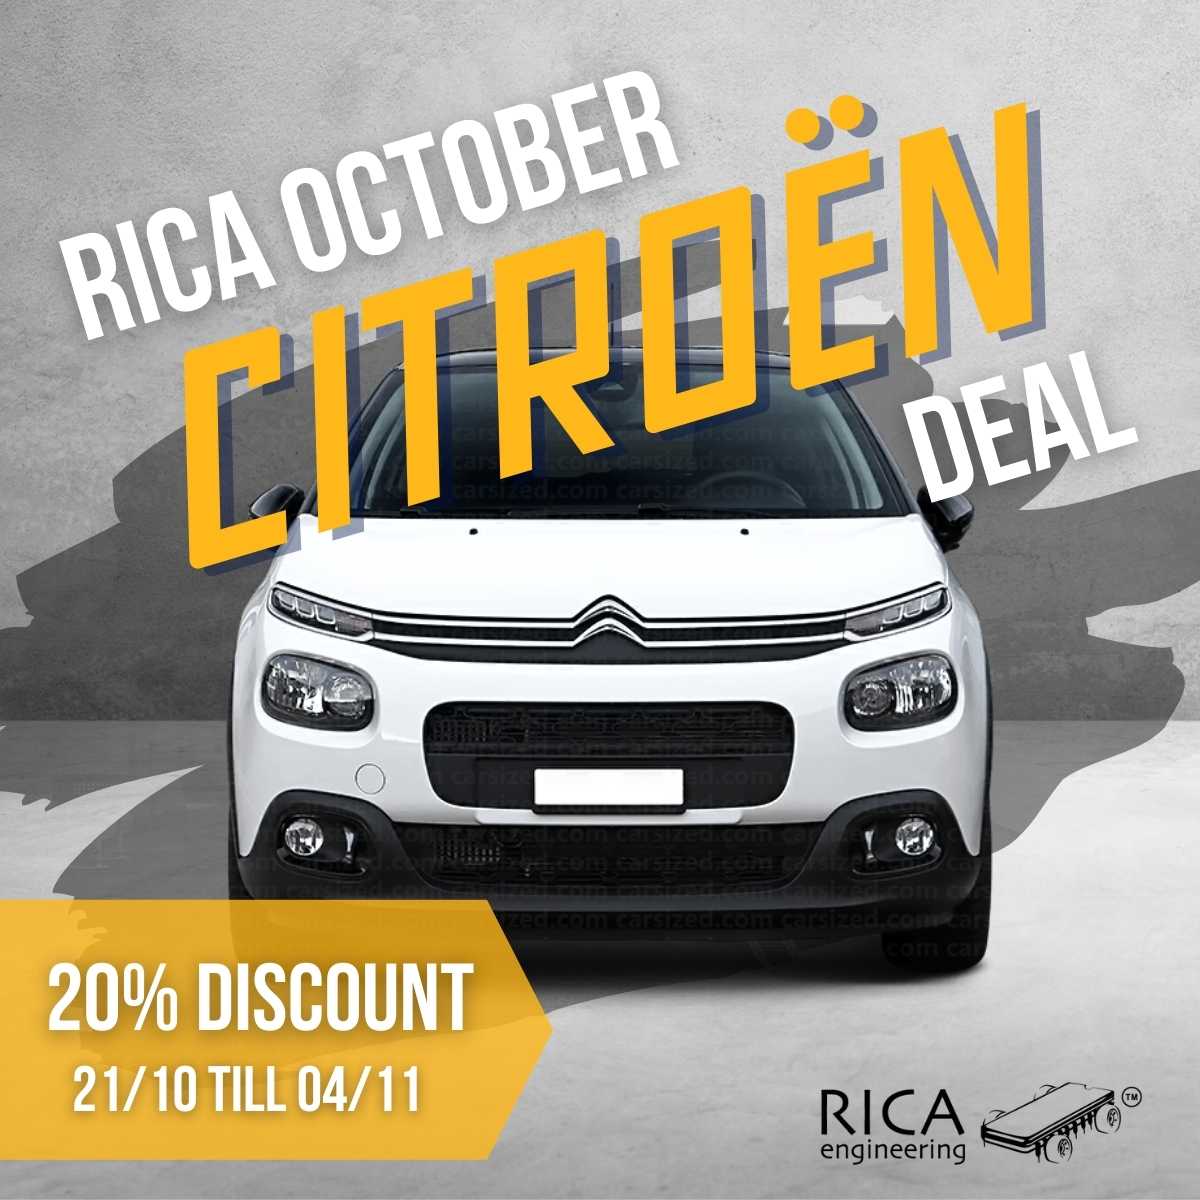 promo deal yellow and white text overlay on photo of white citroën car